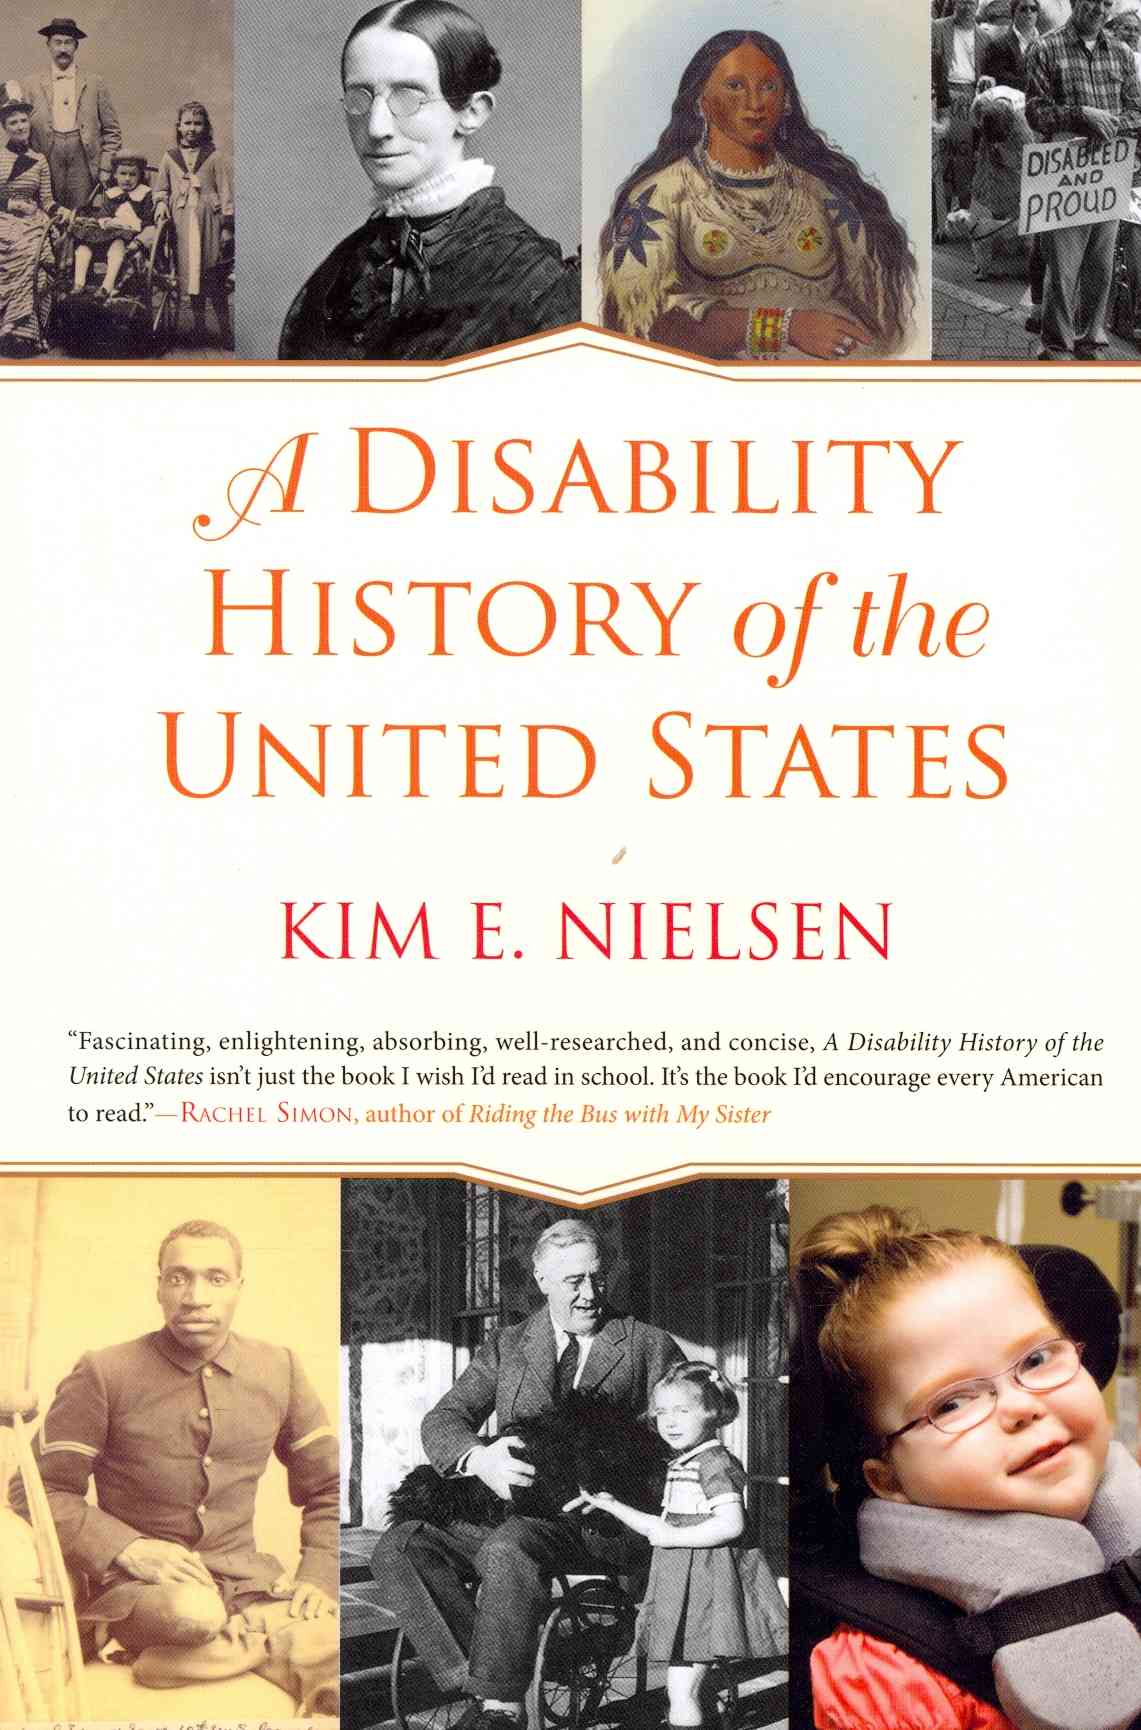 A Disability History of the United States by Kim E. Nielsen